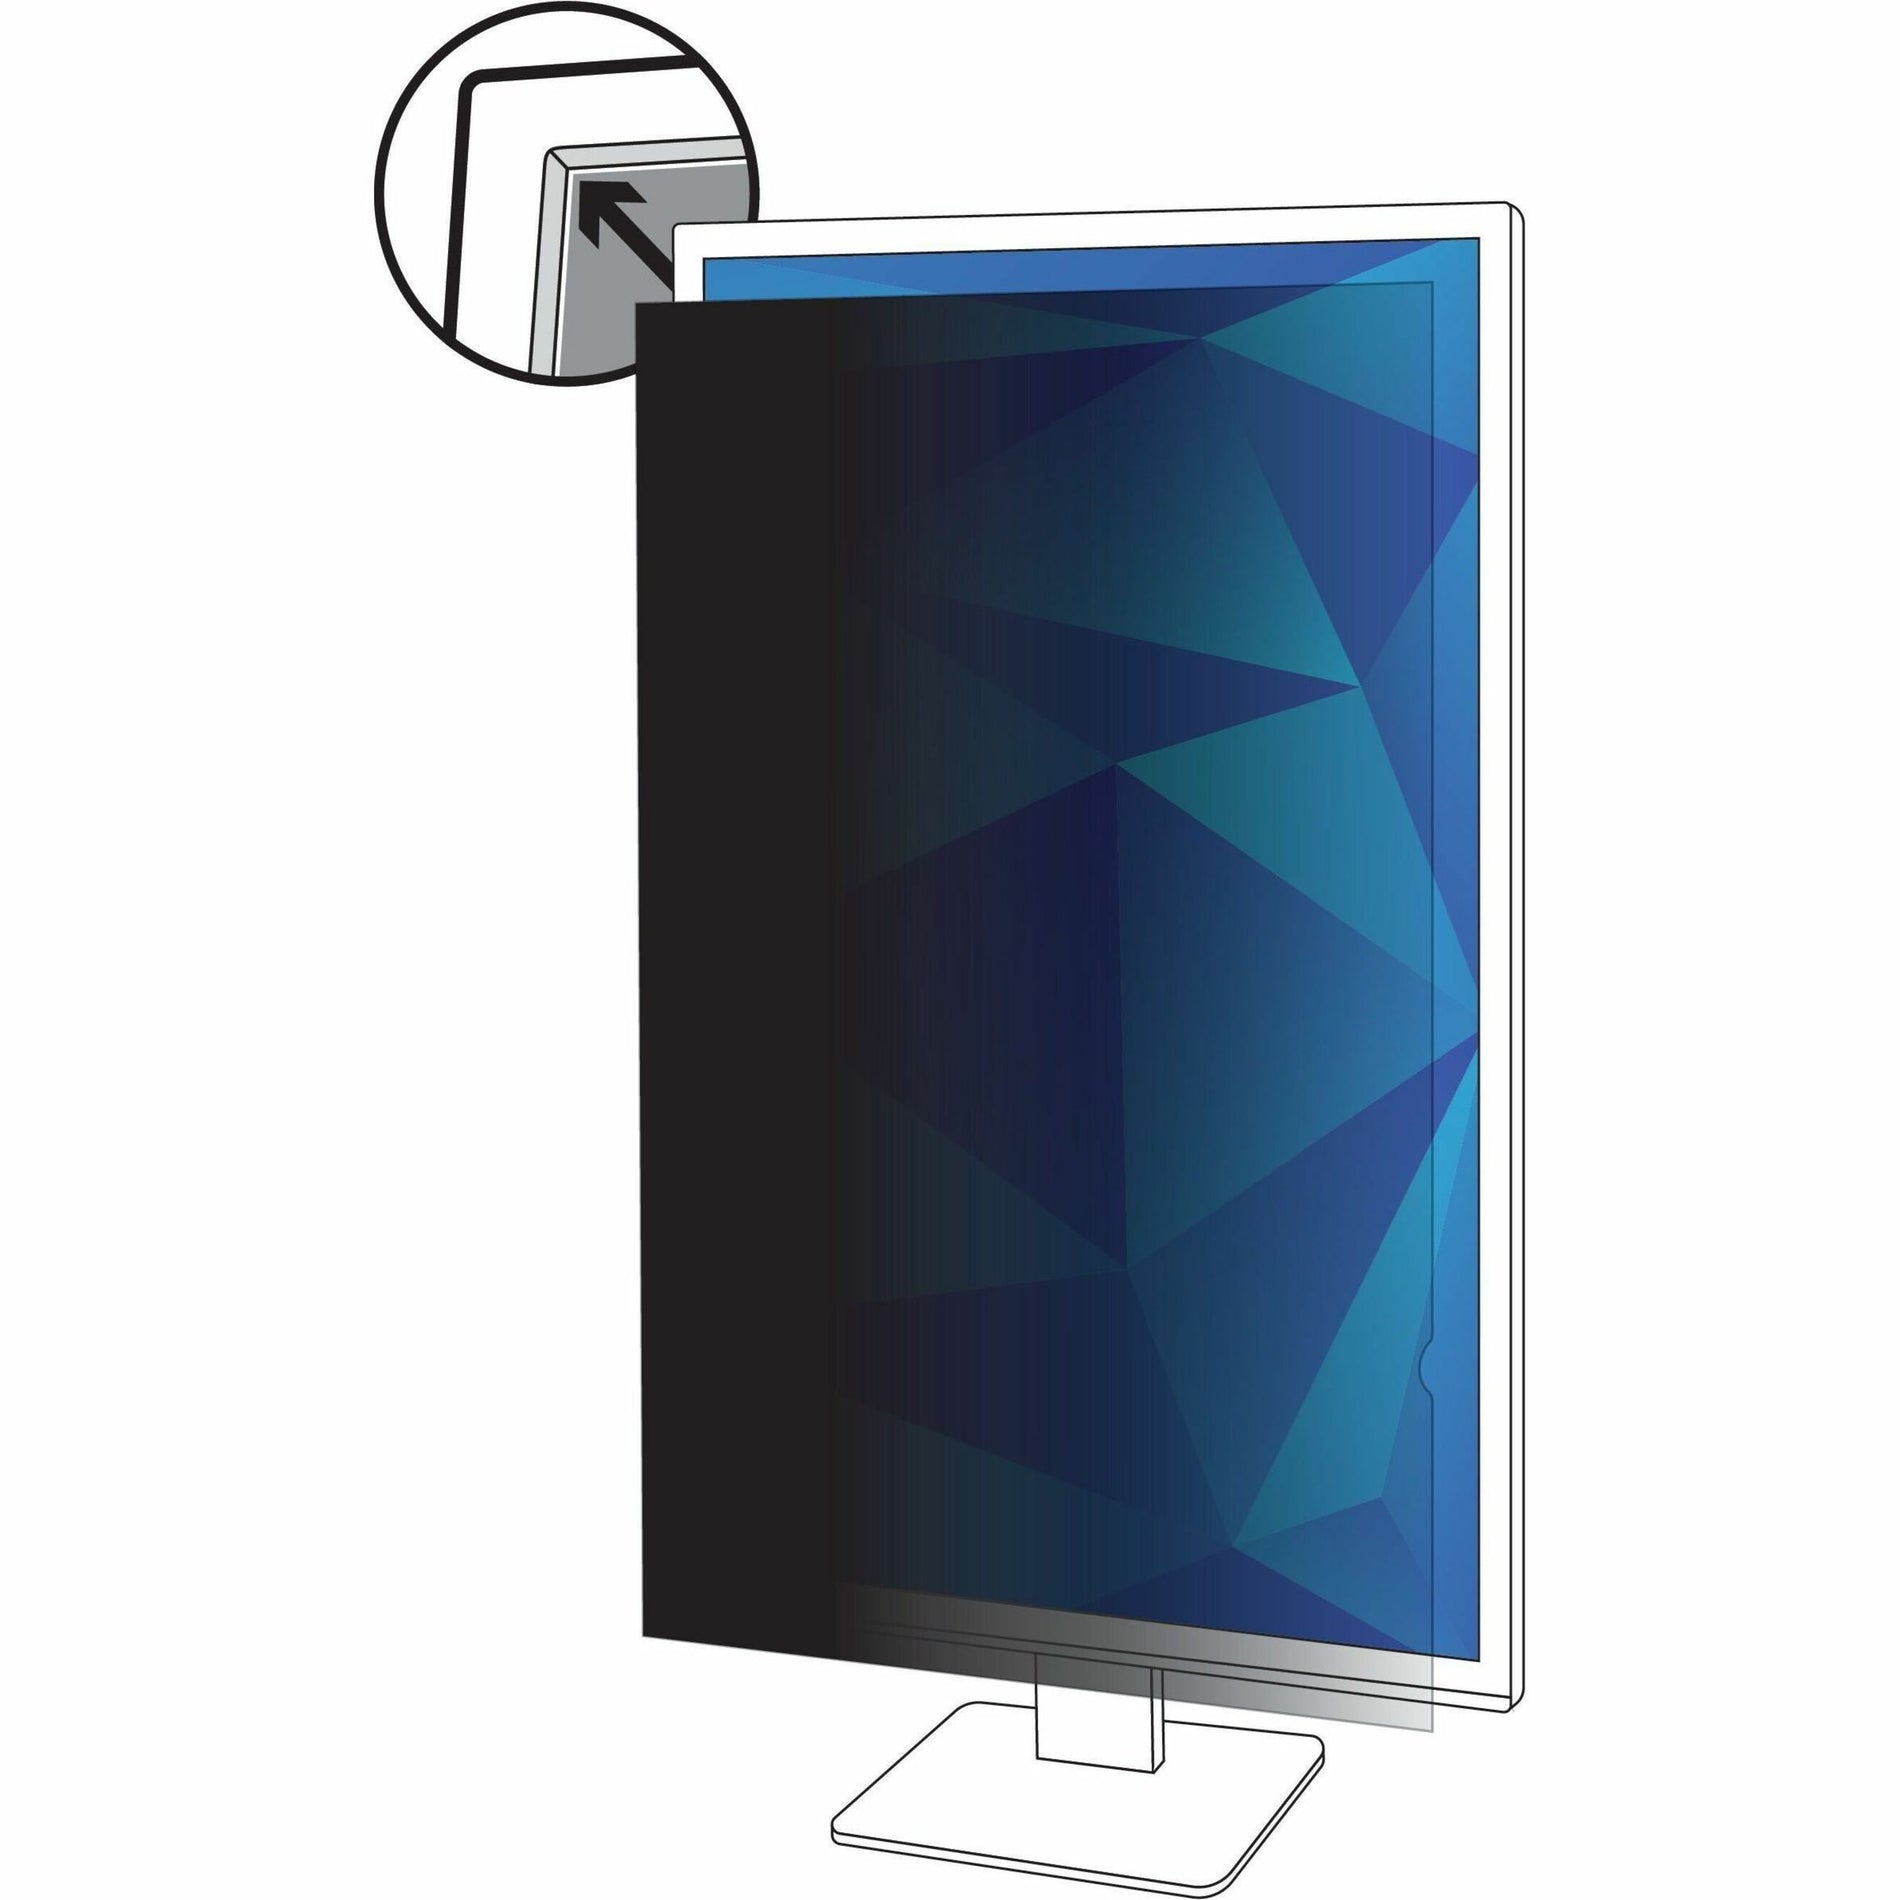 3M PF250W9P Privacy Filter for 25in Portrait Monitor, 16:9, Easy to Apply, Easy Clean, Blue Light Reduction, Limited Viewing Angle, Matte Black